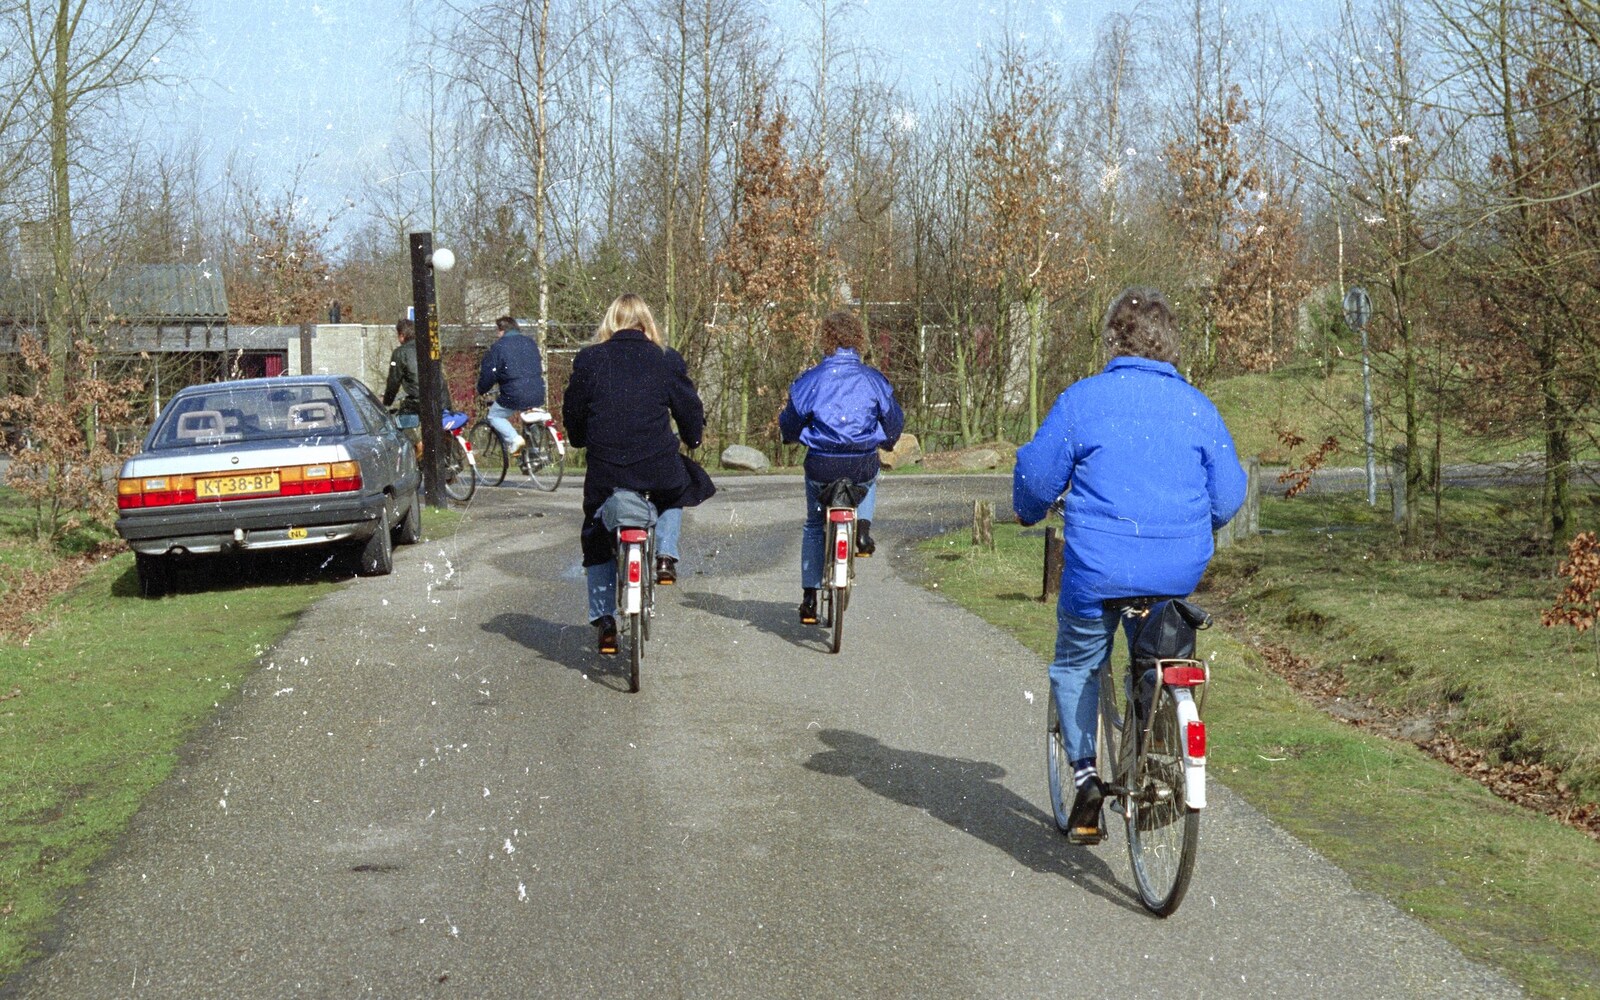 A Trip to Center Parcs, Eemhof, Netherlands - 24th March 1992: The gang on a bunch of hired bikes